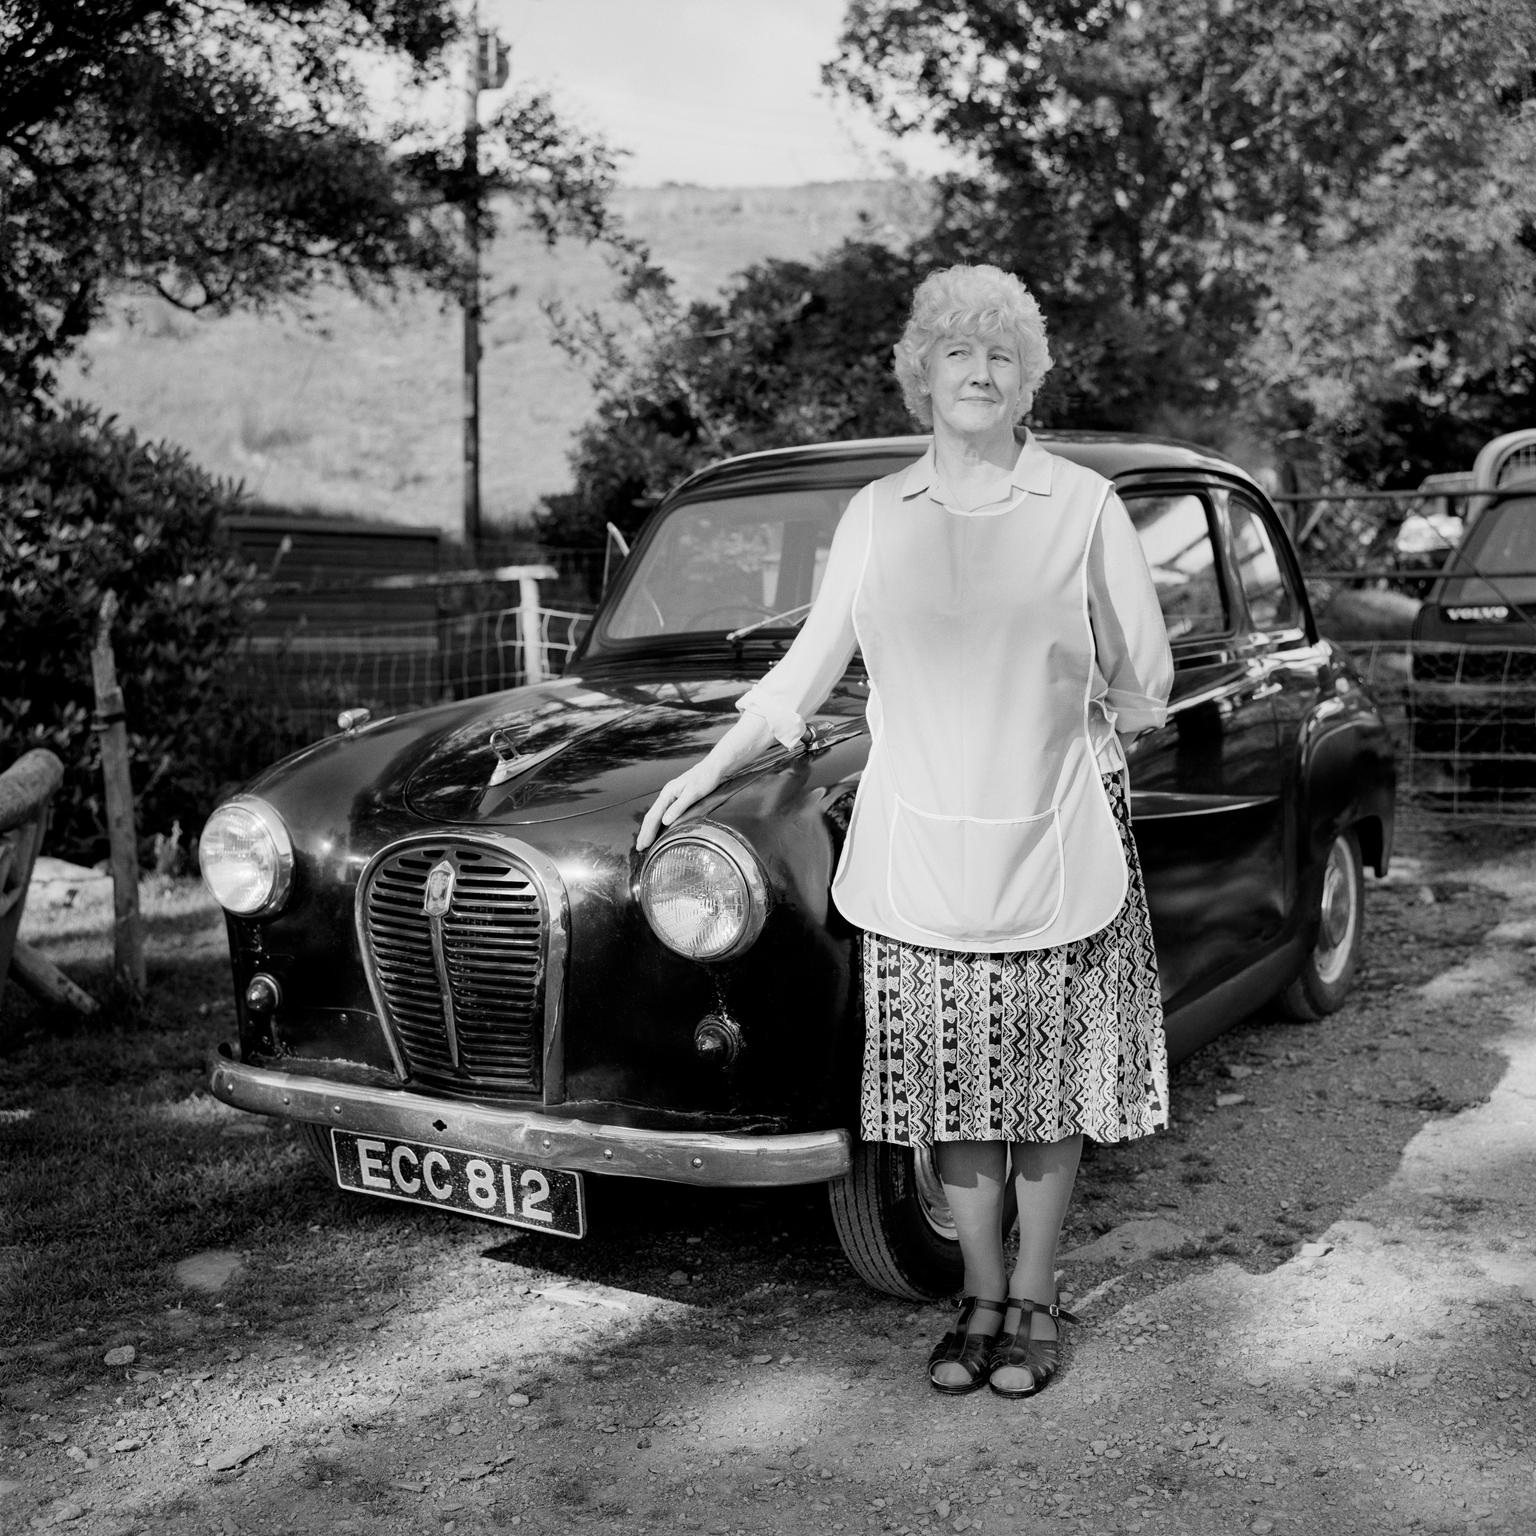 Margaret Roberts (Peggy) housewife. With her 1957, A35 car. Cardiff, Wales